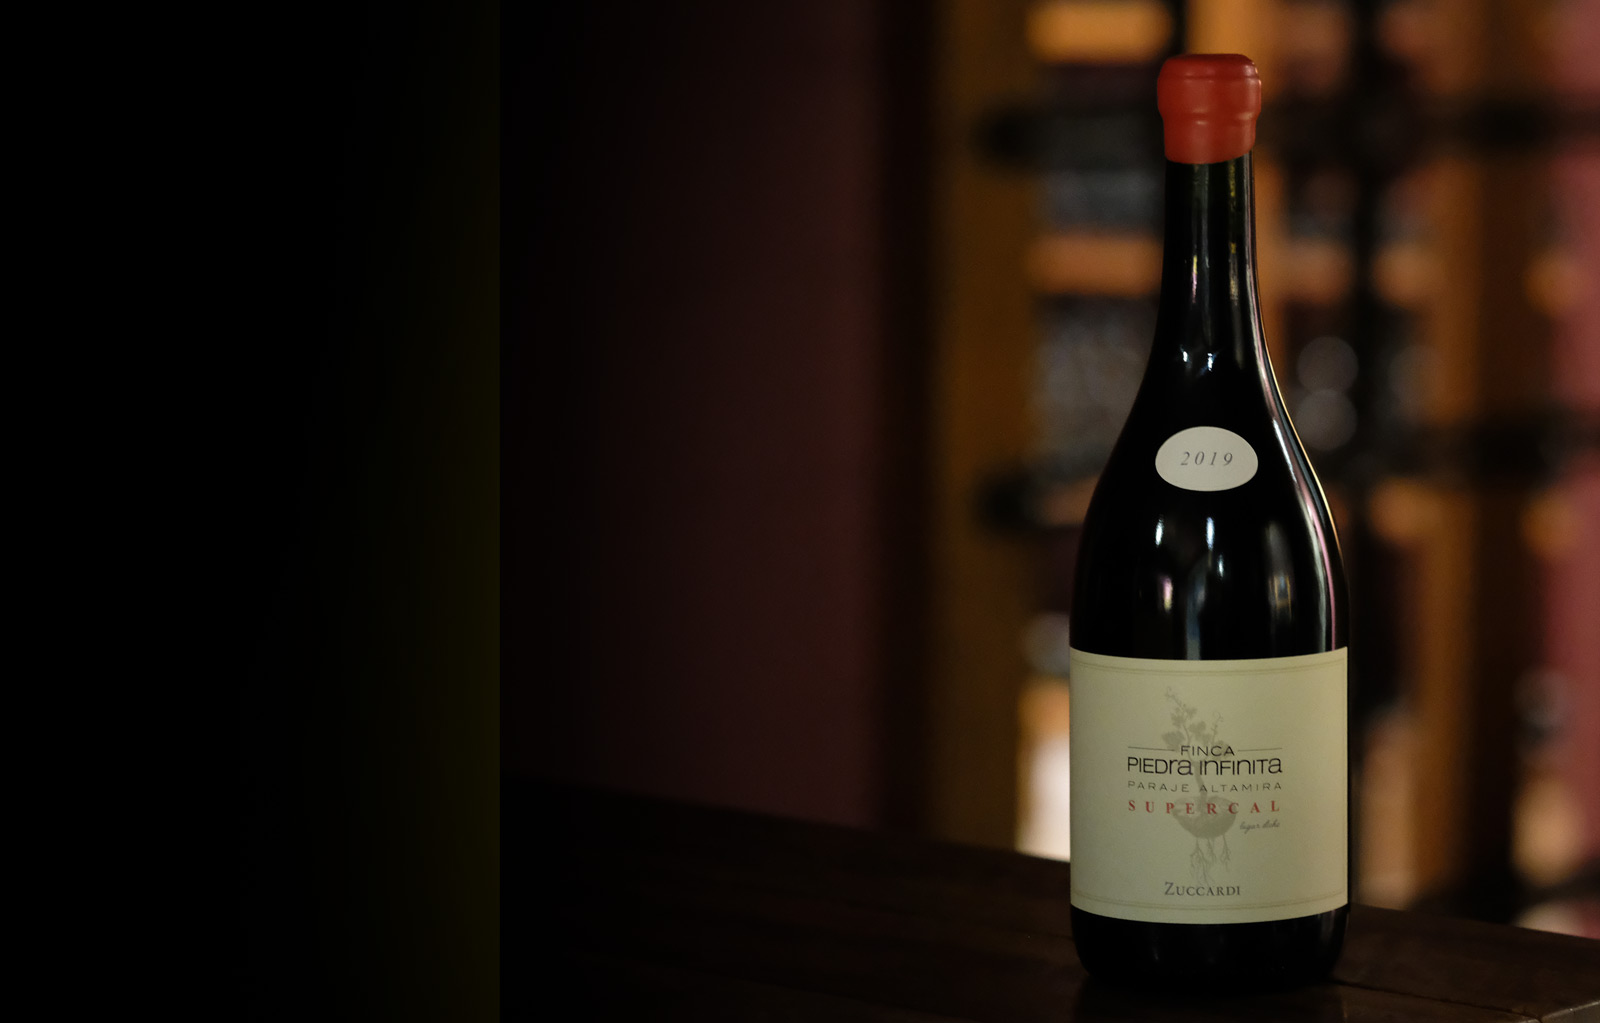 FOR THE THIRD TIME IN A ROW, A WINE BY ZUCCARDI EARNS 100 PARKER POINTS